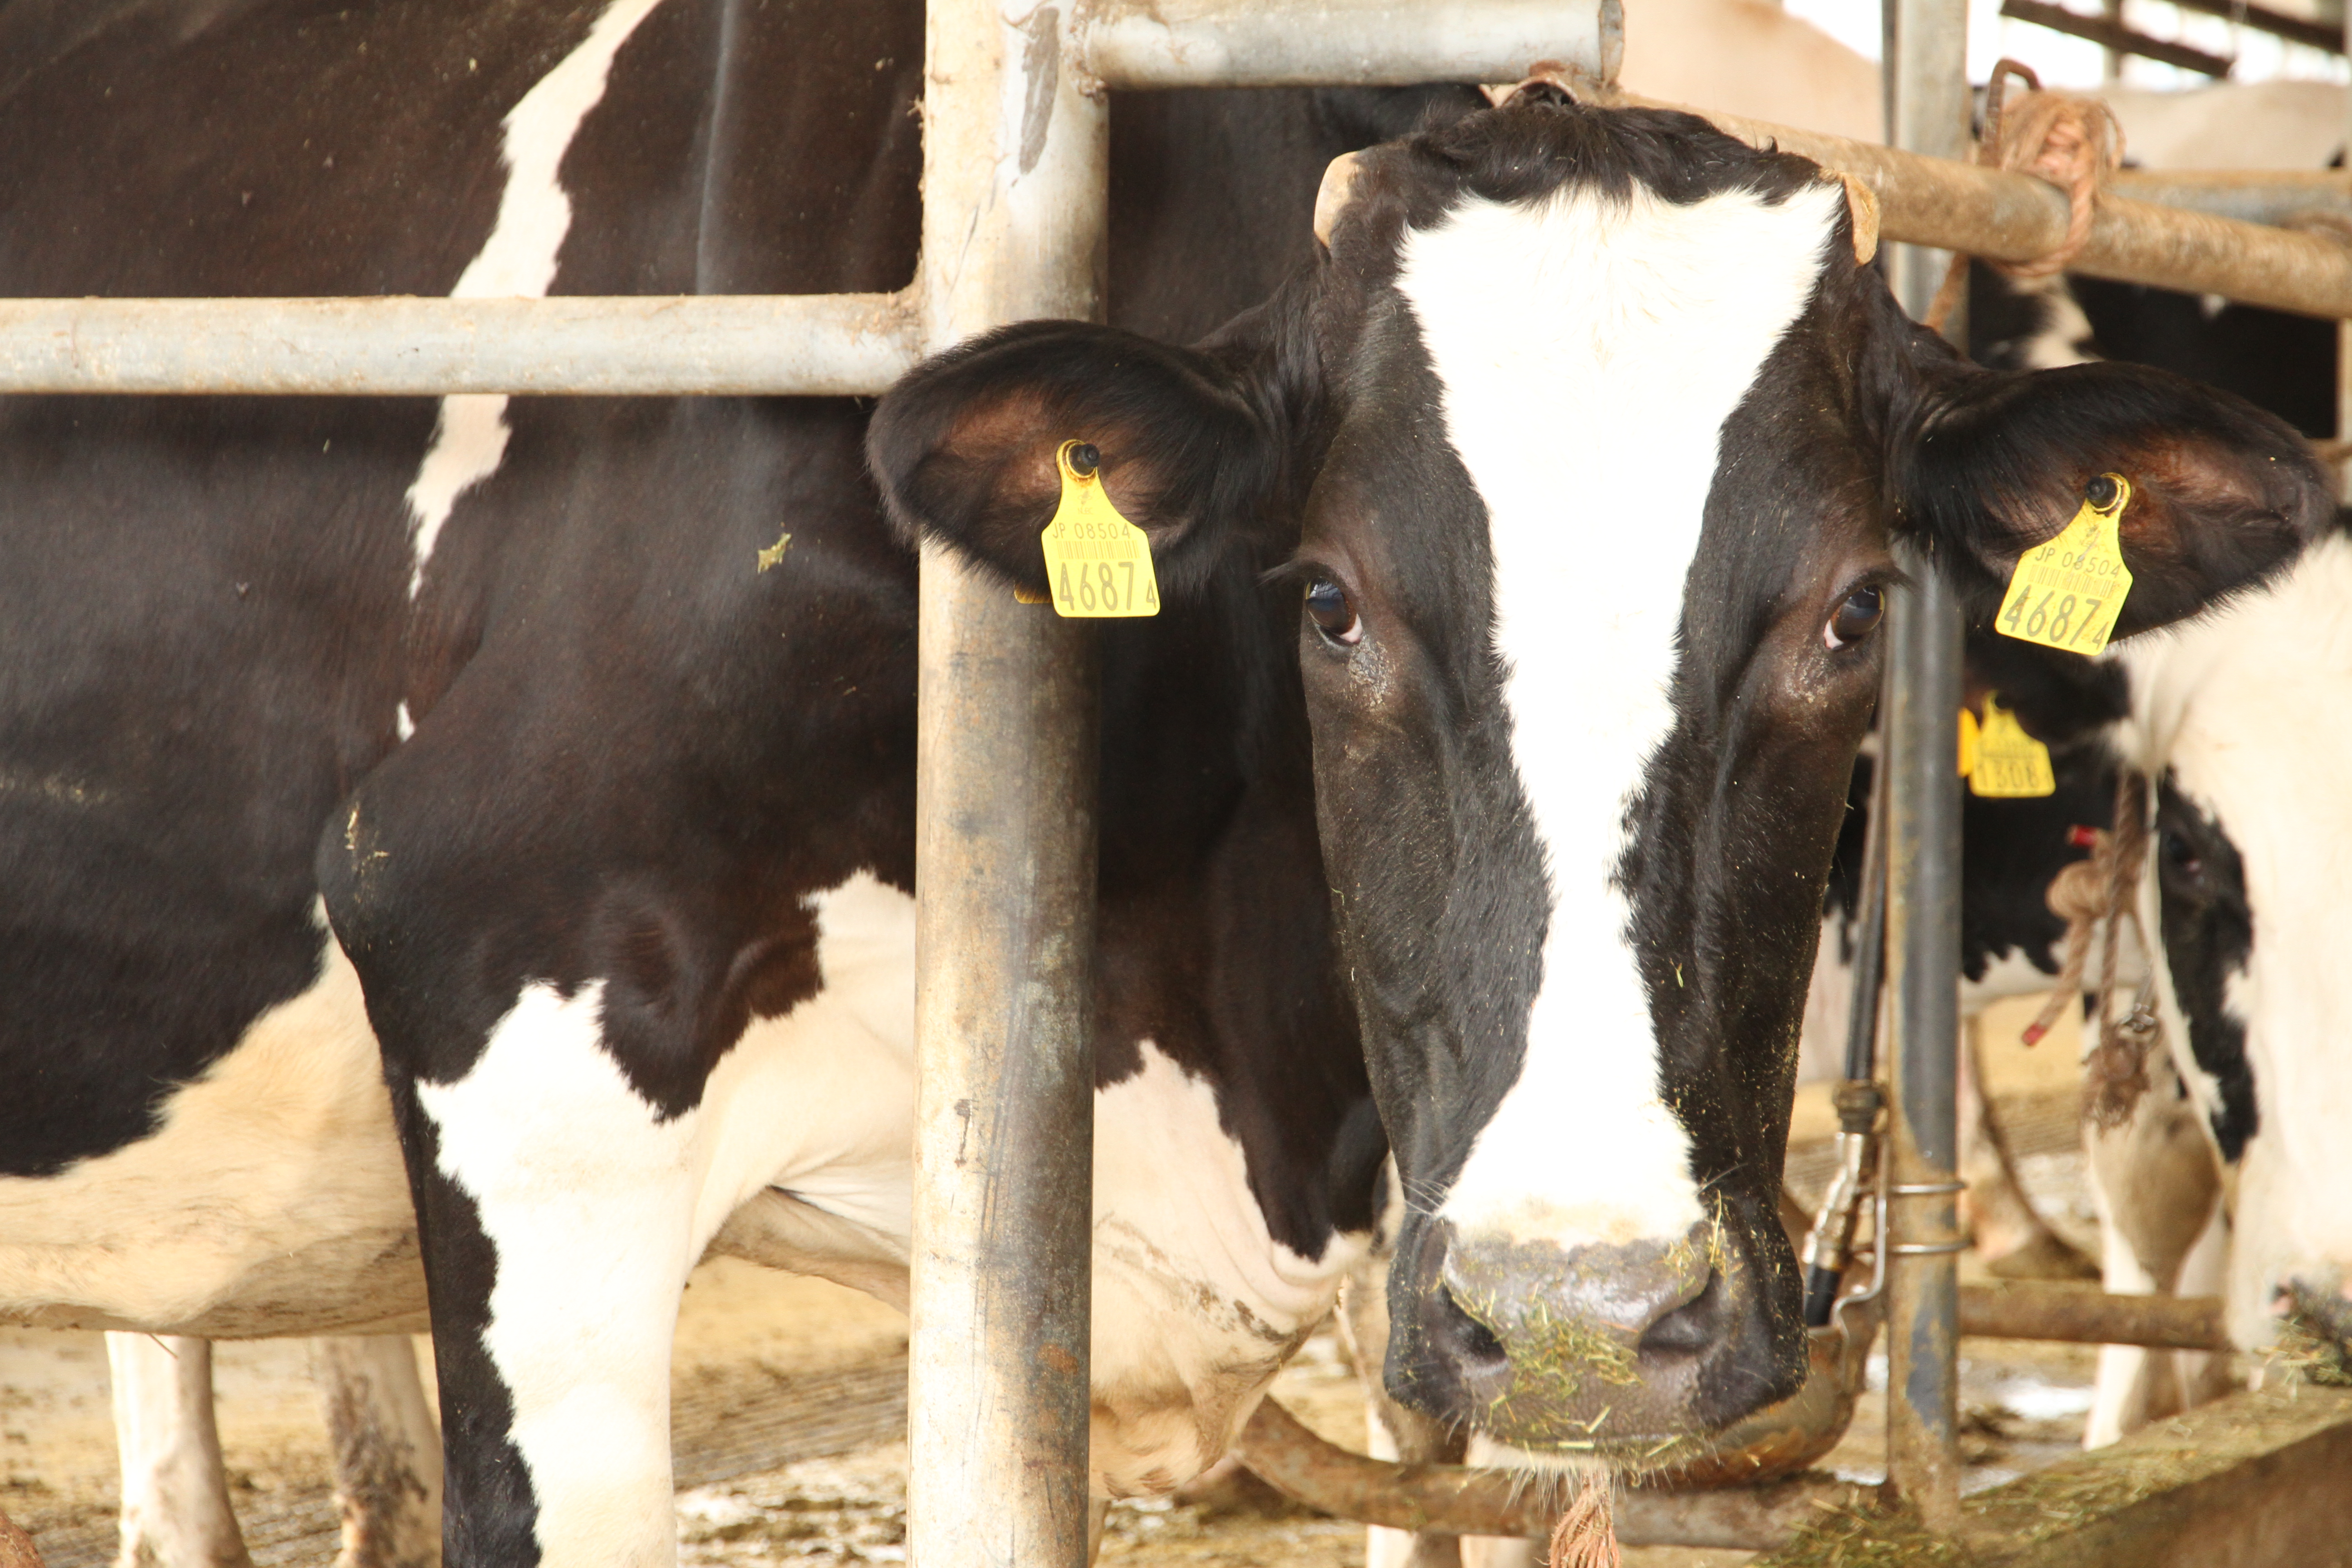 Continuing Dairy Farming in Fukushima, after the earthquake